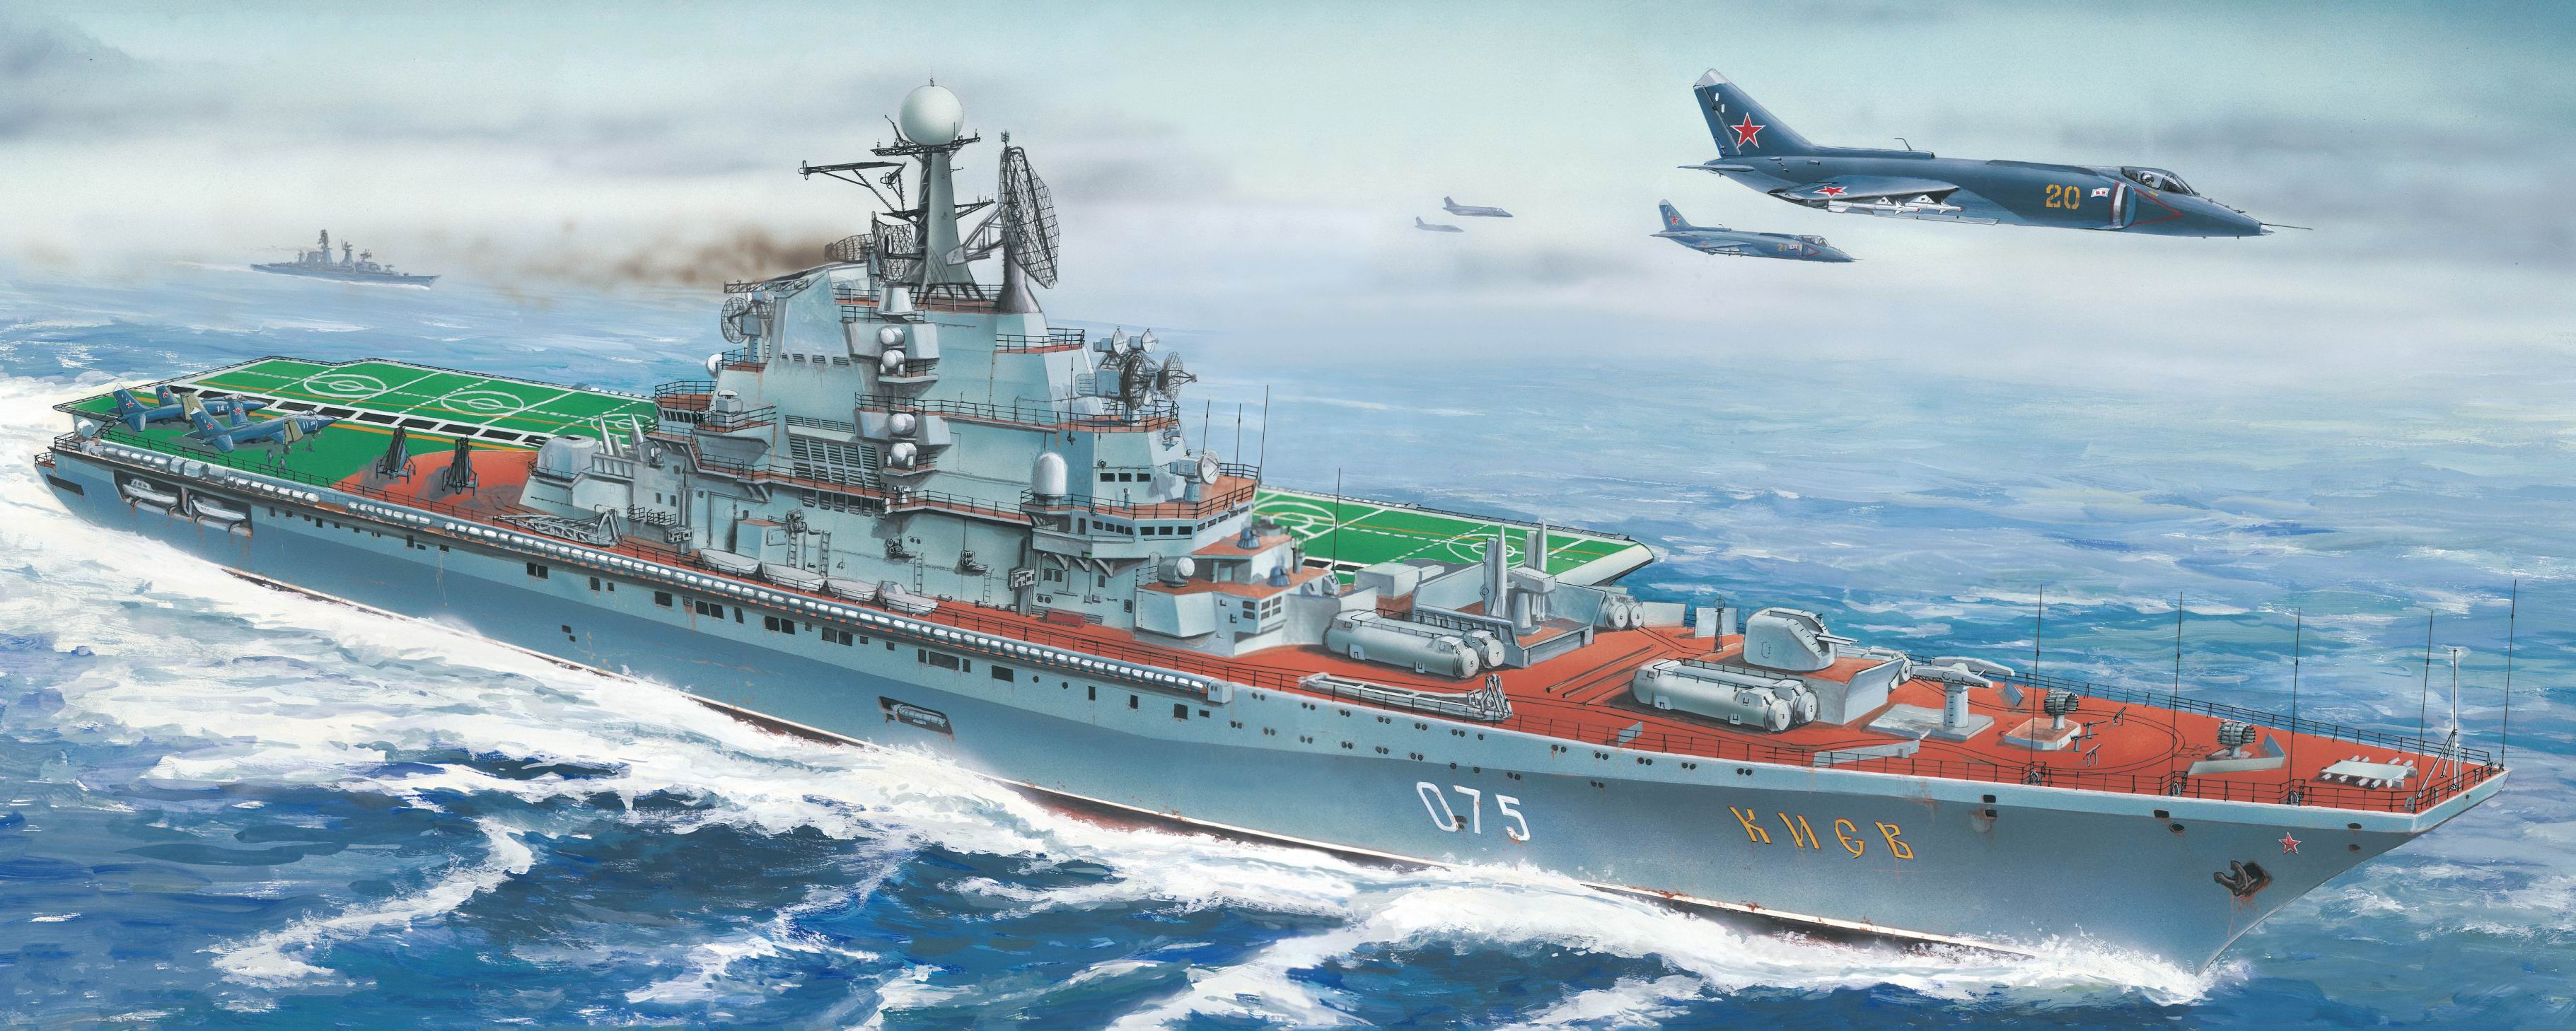 General 3642x1458 warship aircraft military sea sky army army gear aircraft carrier water Russian Navy waves clouds vehicle smoke artwork